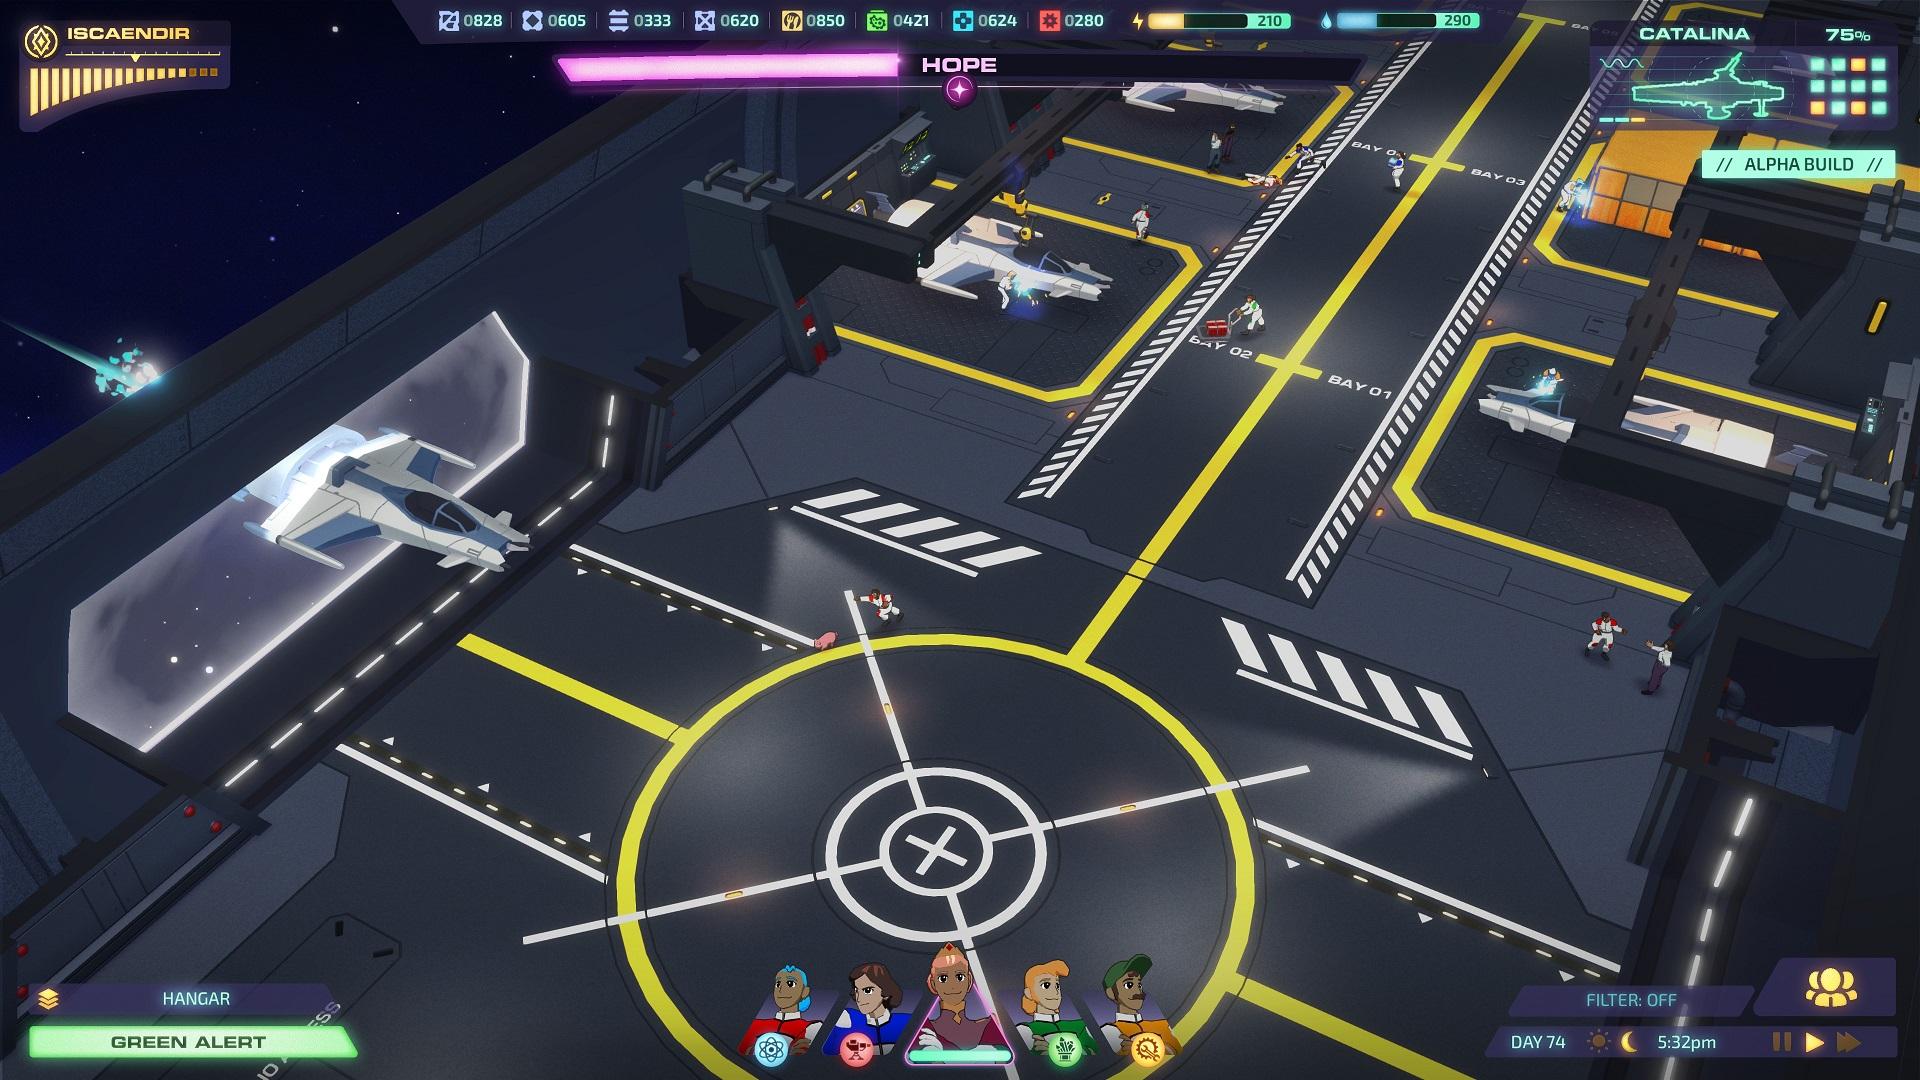 'Jumplight Odyssey' A look at the Hanger with battle and scavenger ships.